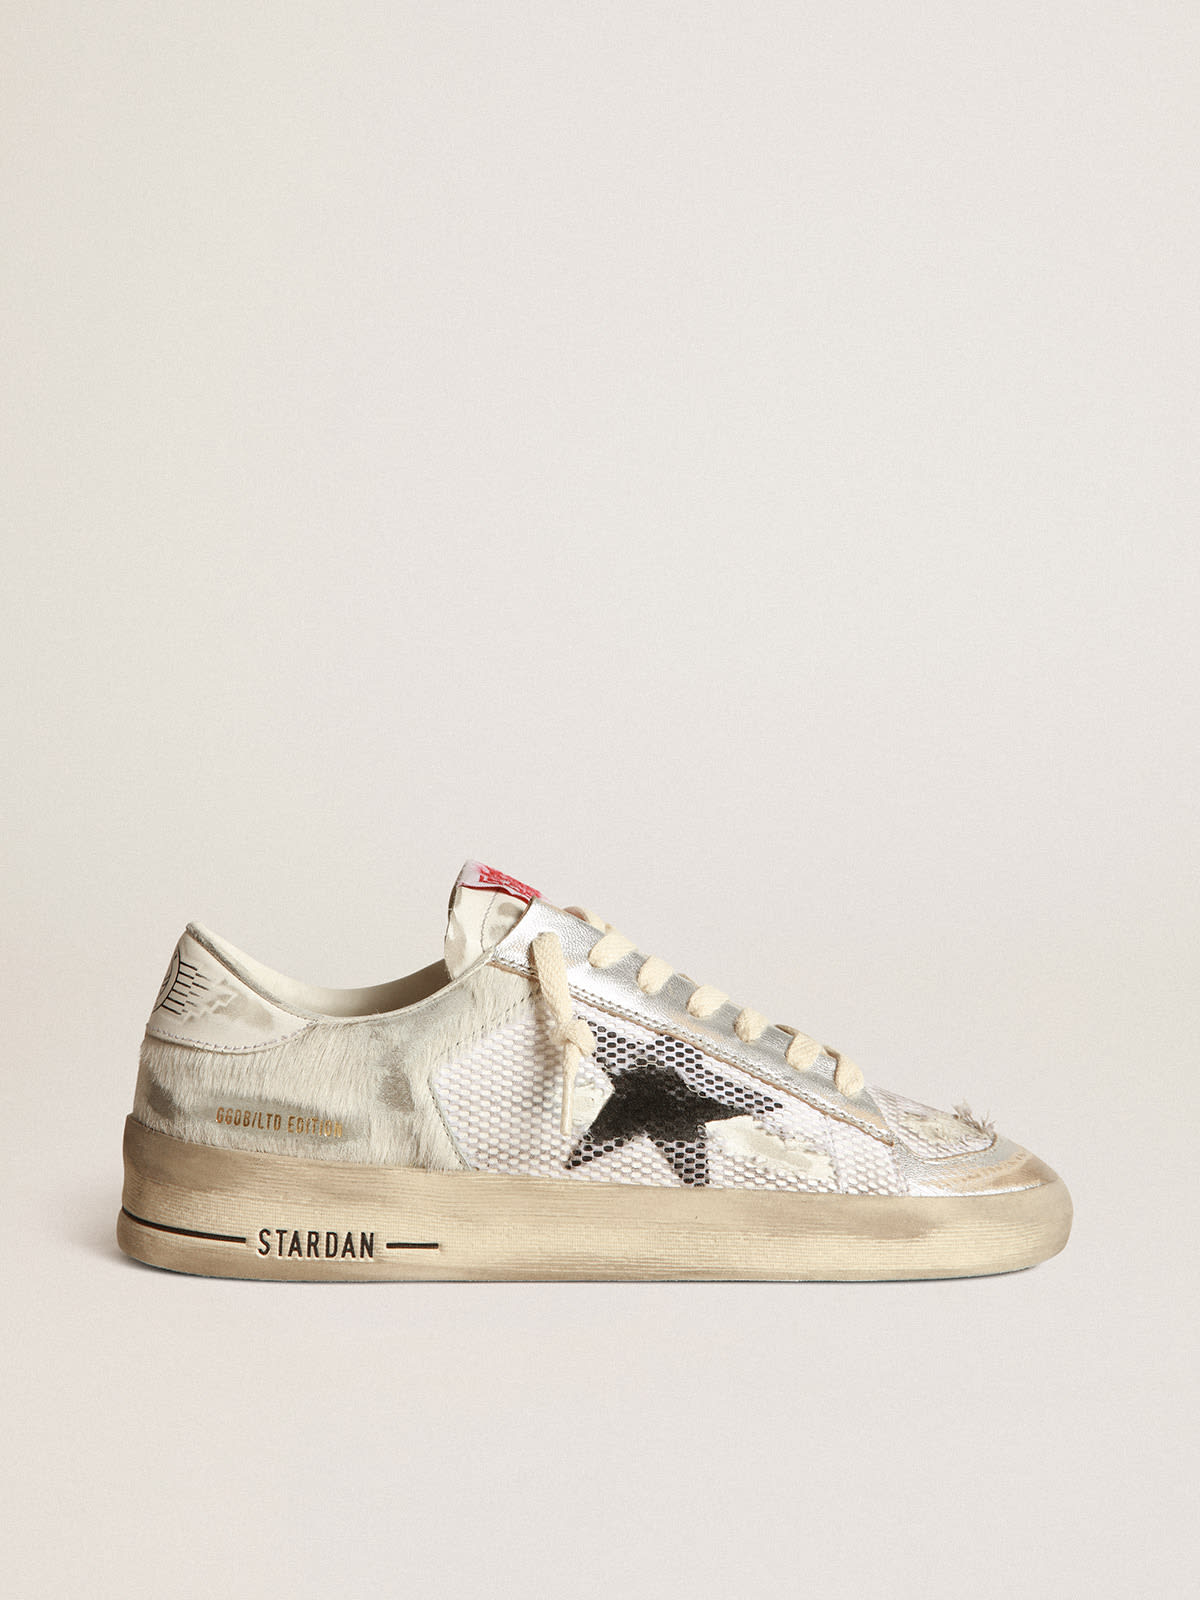 Stardan LAB sneakers in white pony skin and leather with black suede star